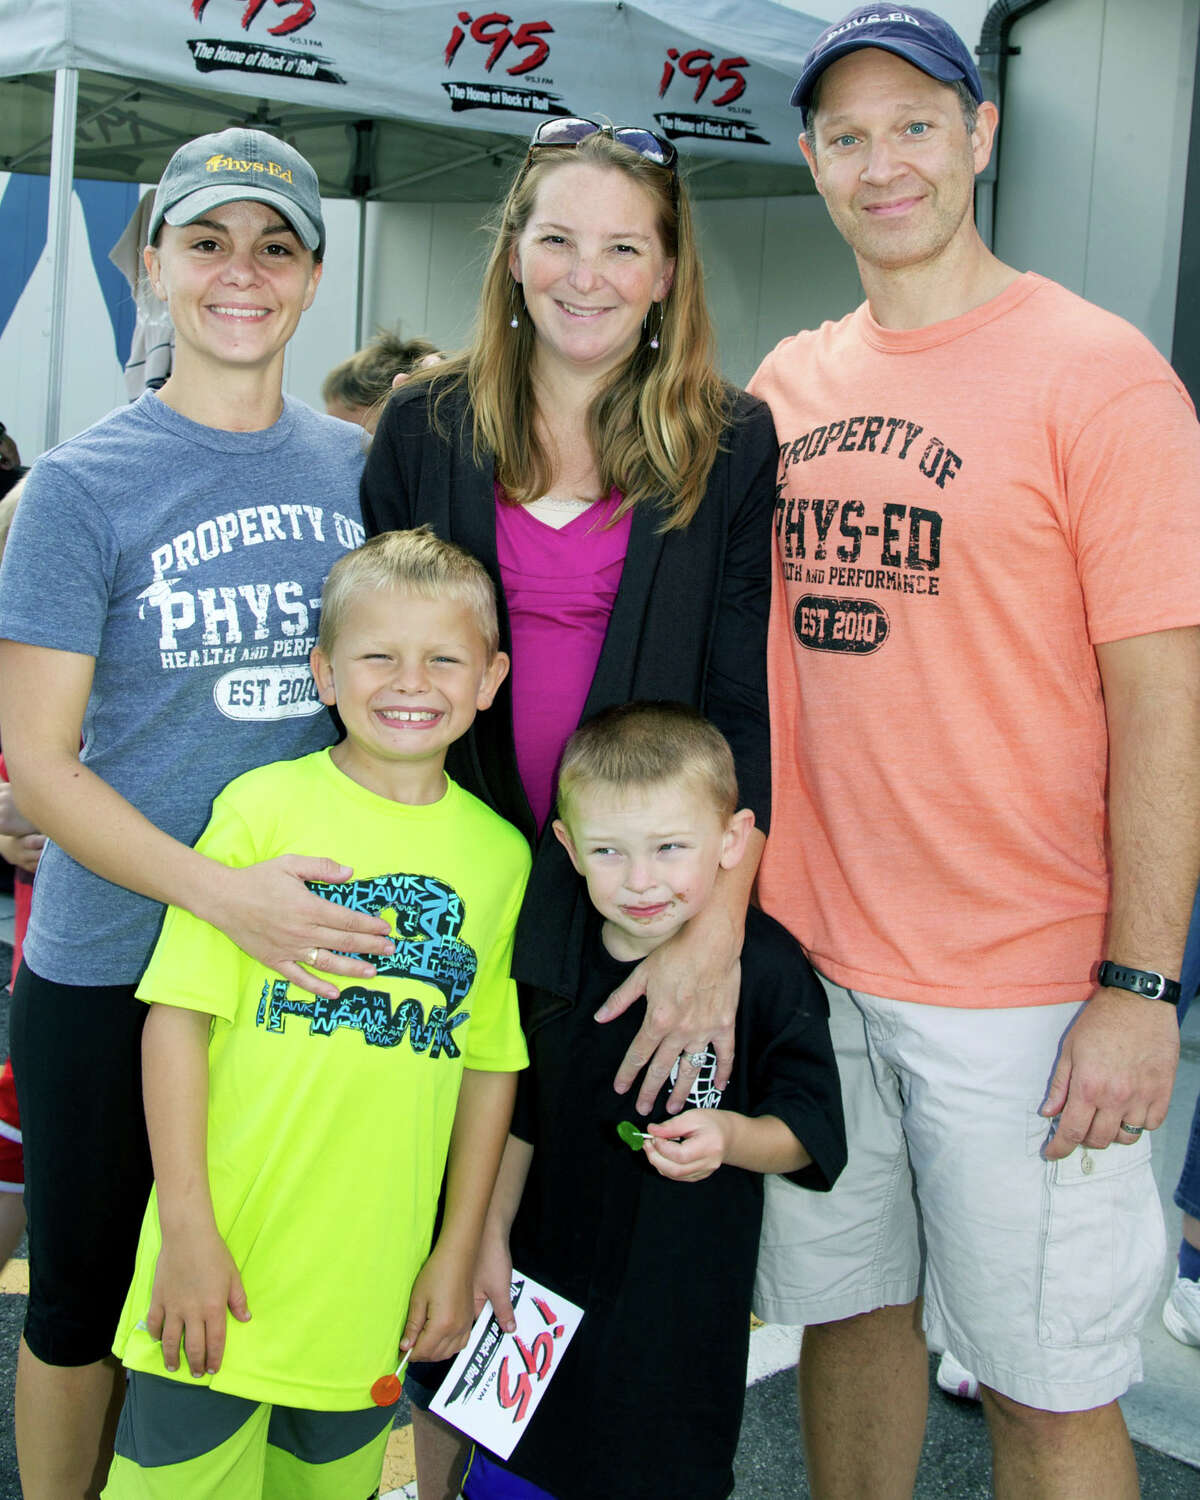 Phys-Ed's Valerie Walsh, left, and Eric Corson welcome members oi the Wilkinson family to Saturday's benefit in New Milford. Sporting smiles appreciative for the community support are Alice Wilkinson and her two sons, Jacob, left, and Everett. Sept. 15, 2012